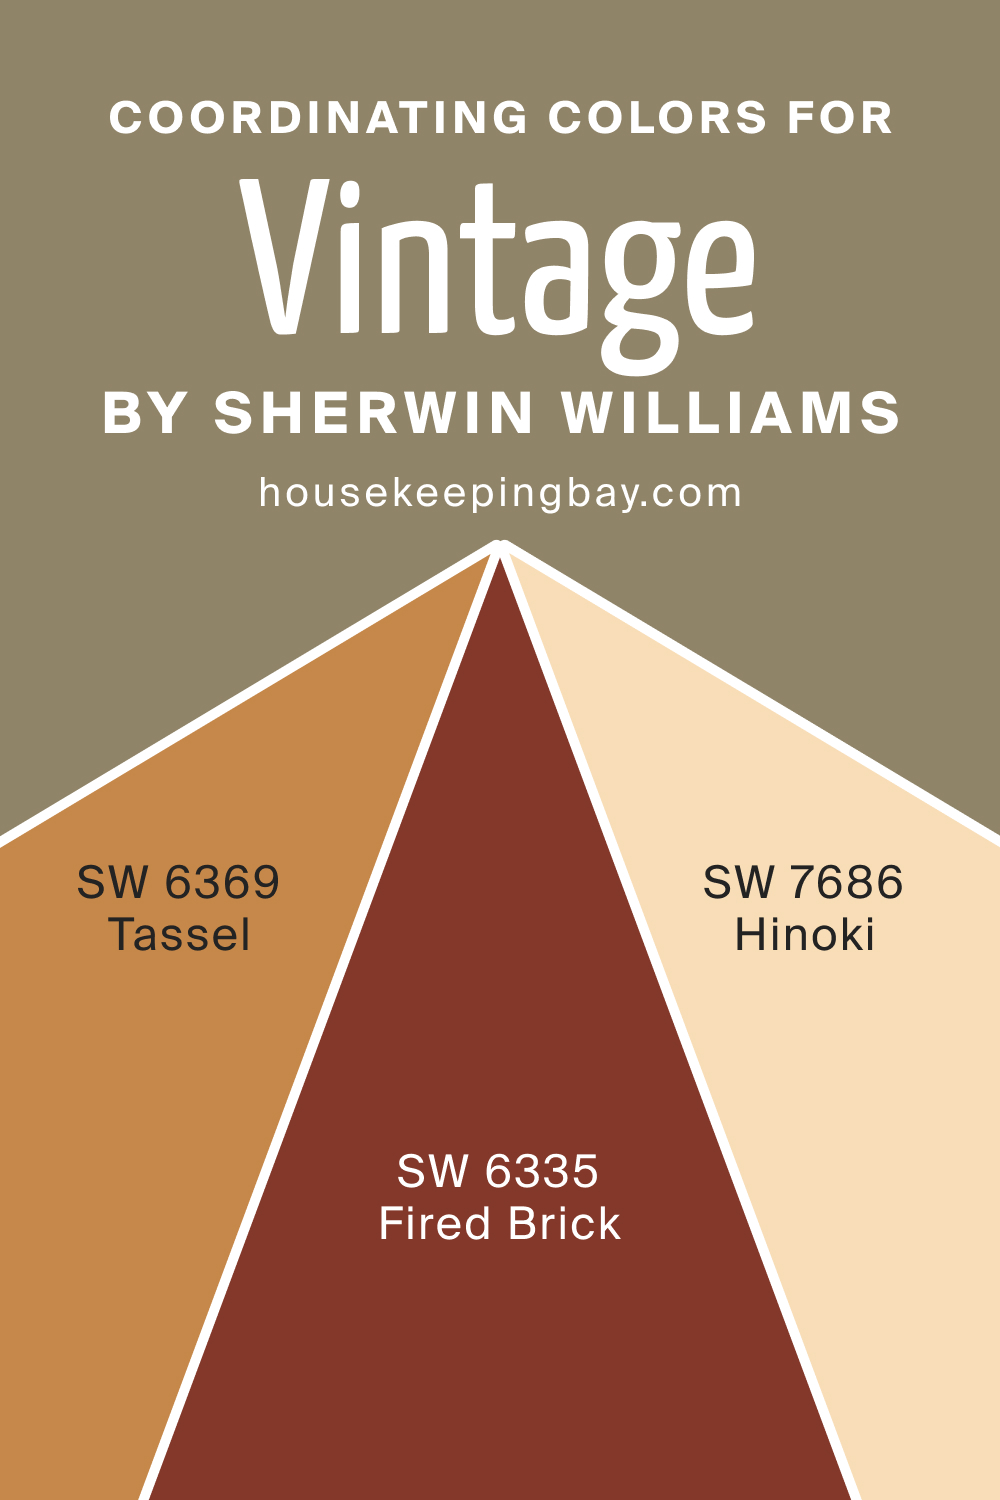 Coordinating Colors for SW 9528 Vintage by Sherwin Williams